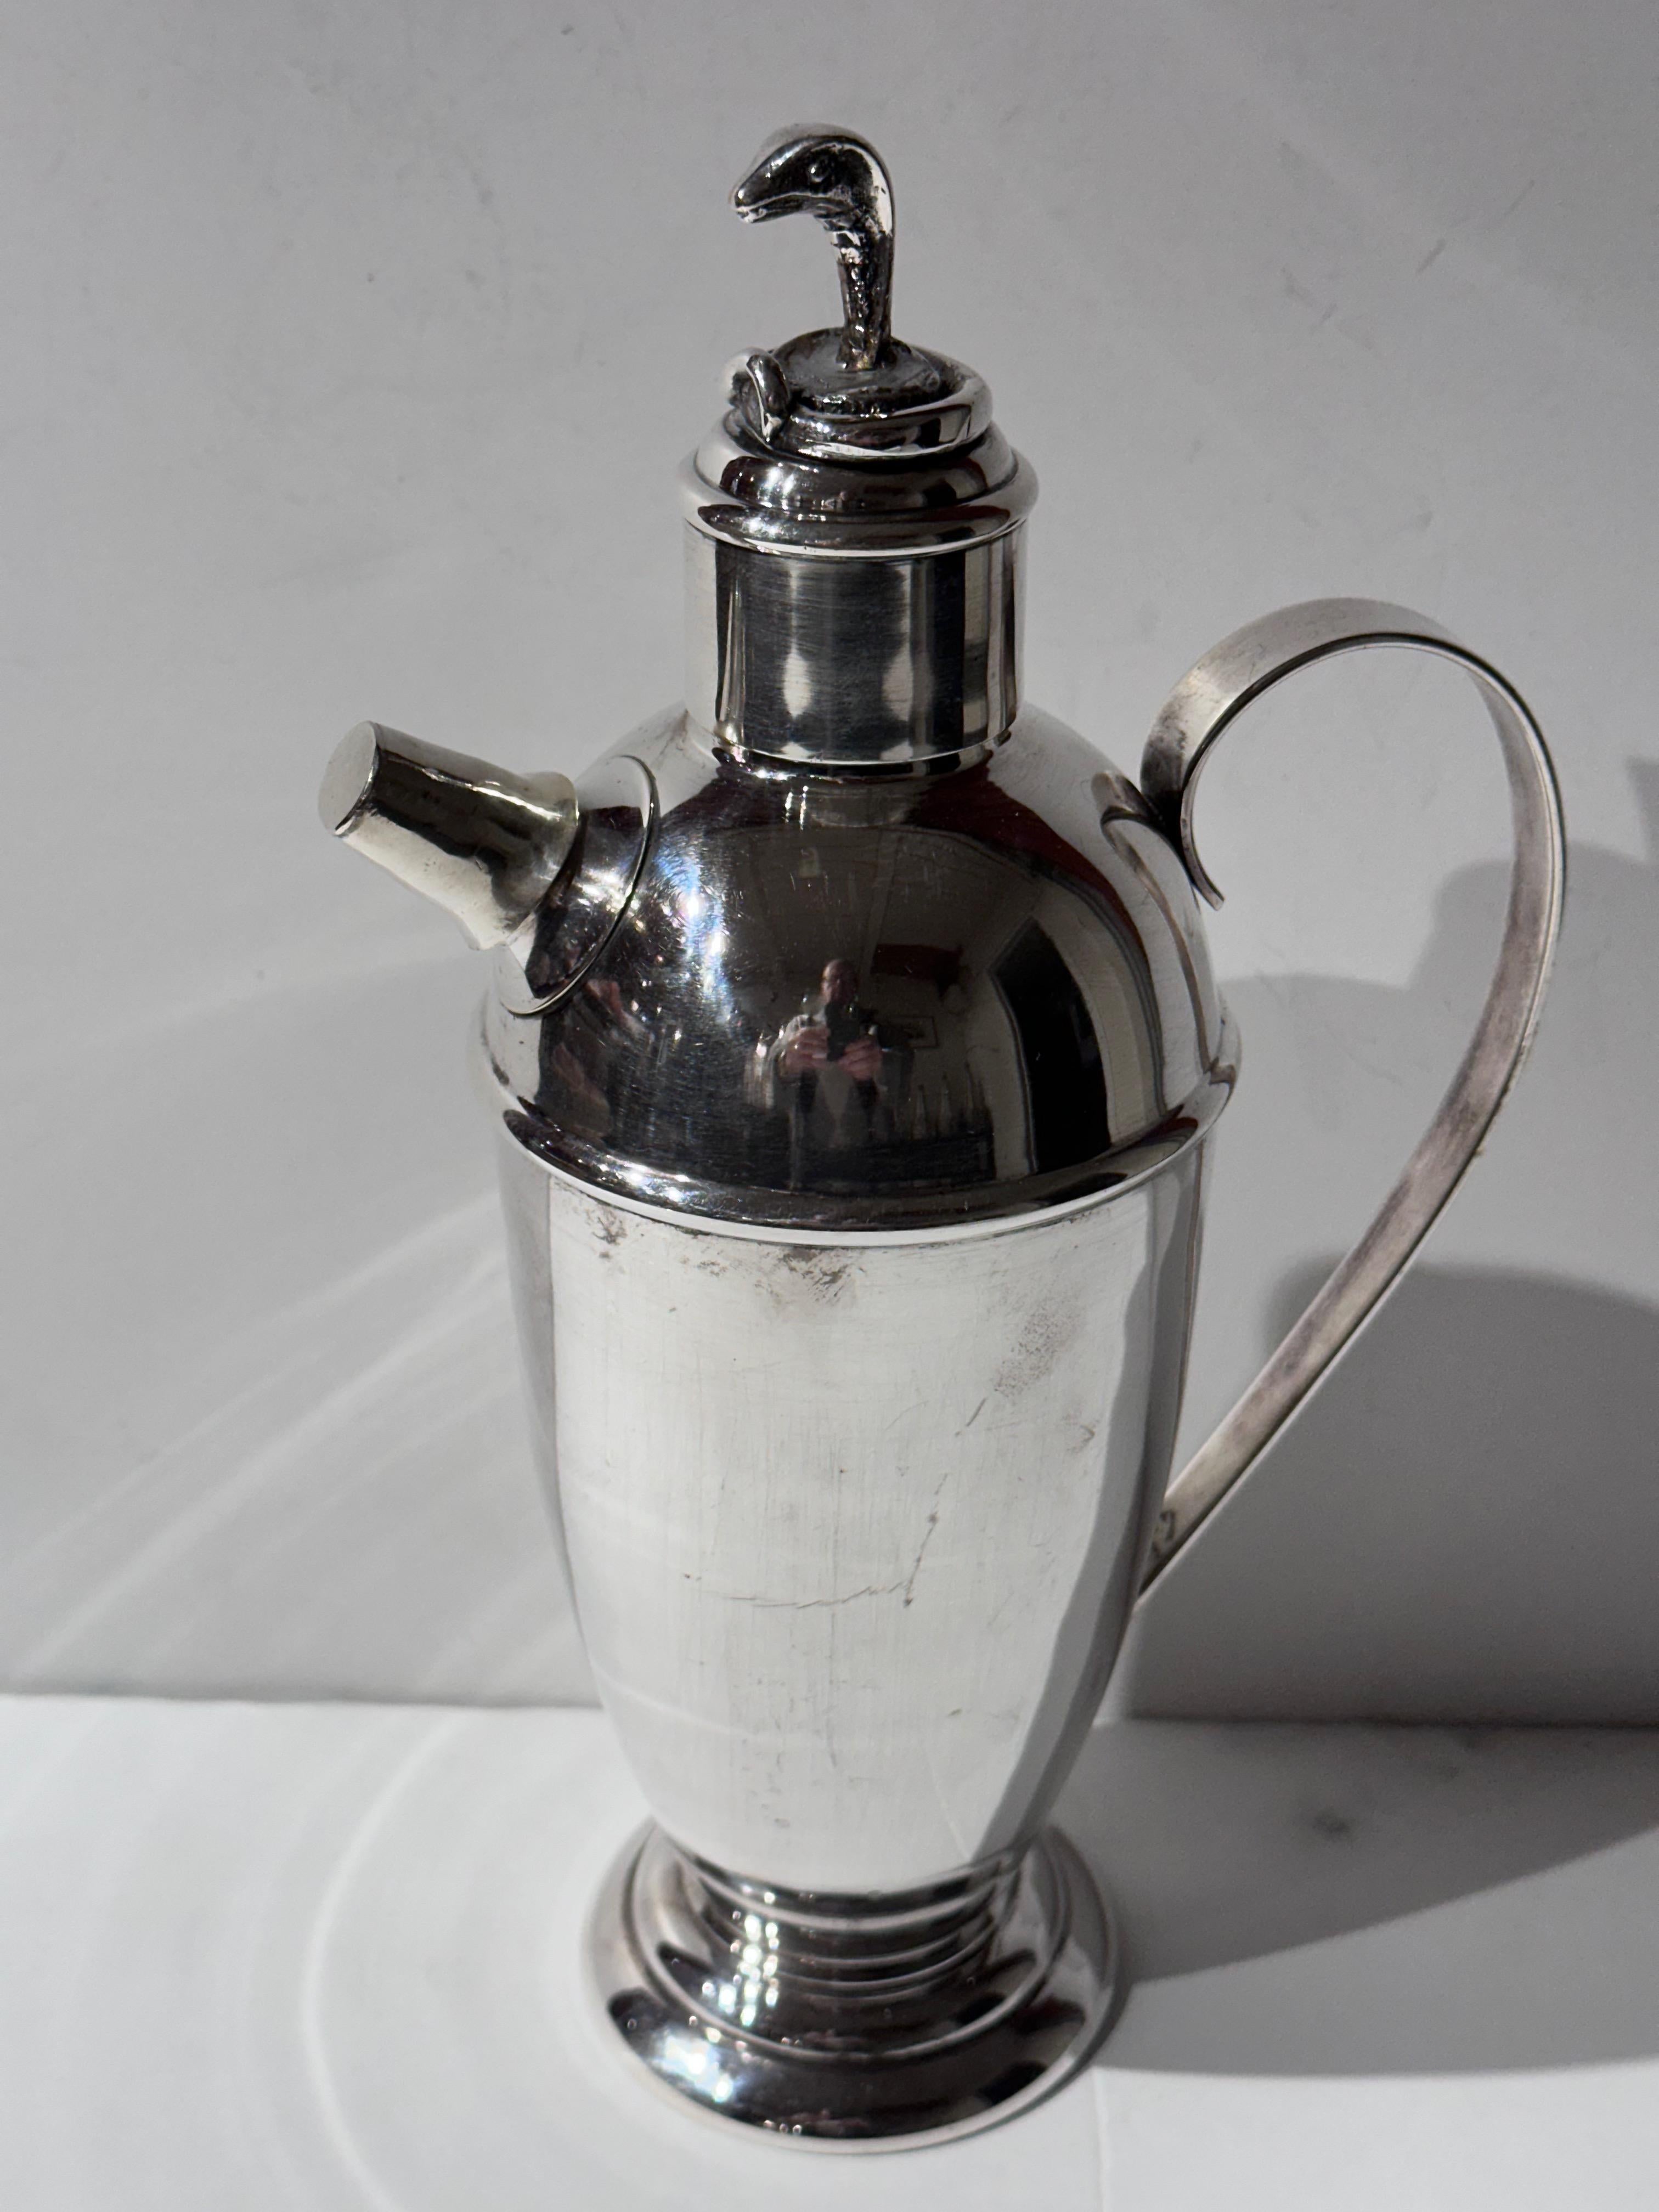 This Vintage Danish Art Deco Silver Plated Cocktail Shaker by Prima Sølvplet is a rare and stunning piece of functional art. The shaker features an unusual top adorned with a snake motif, adding a unique and captivating element to its